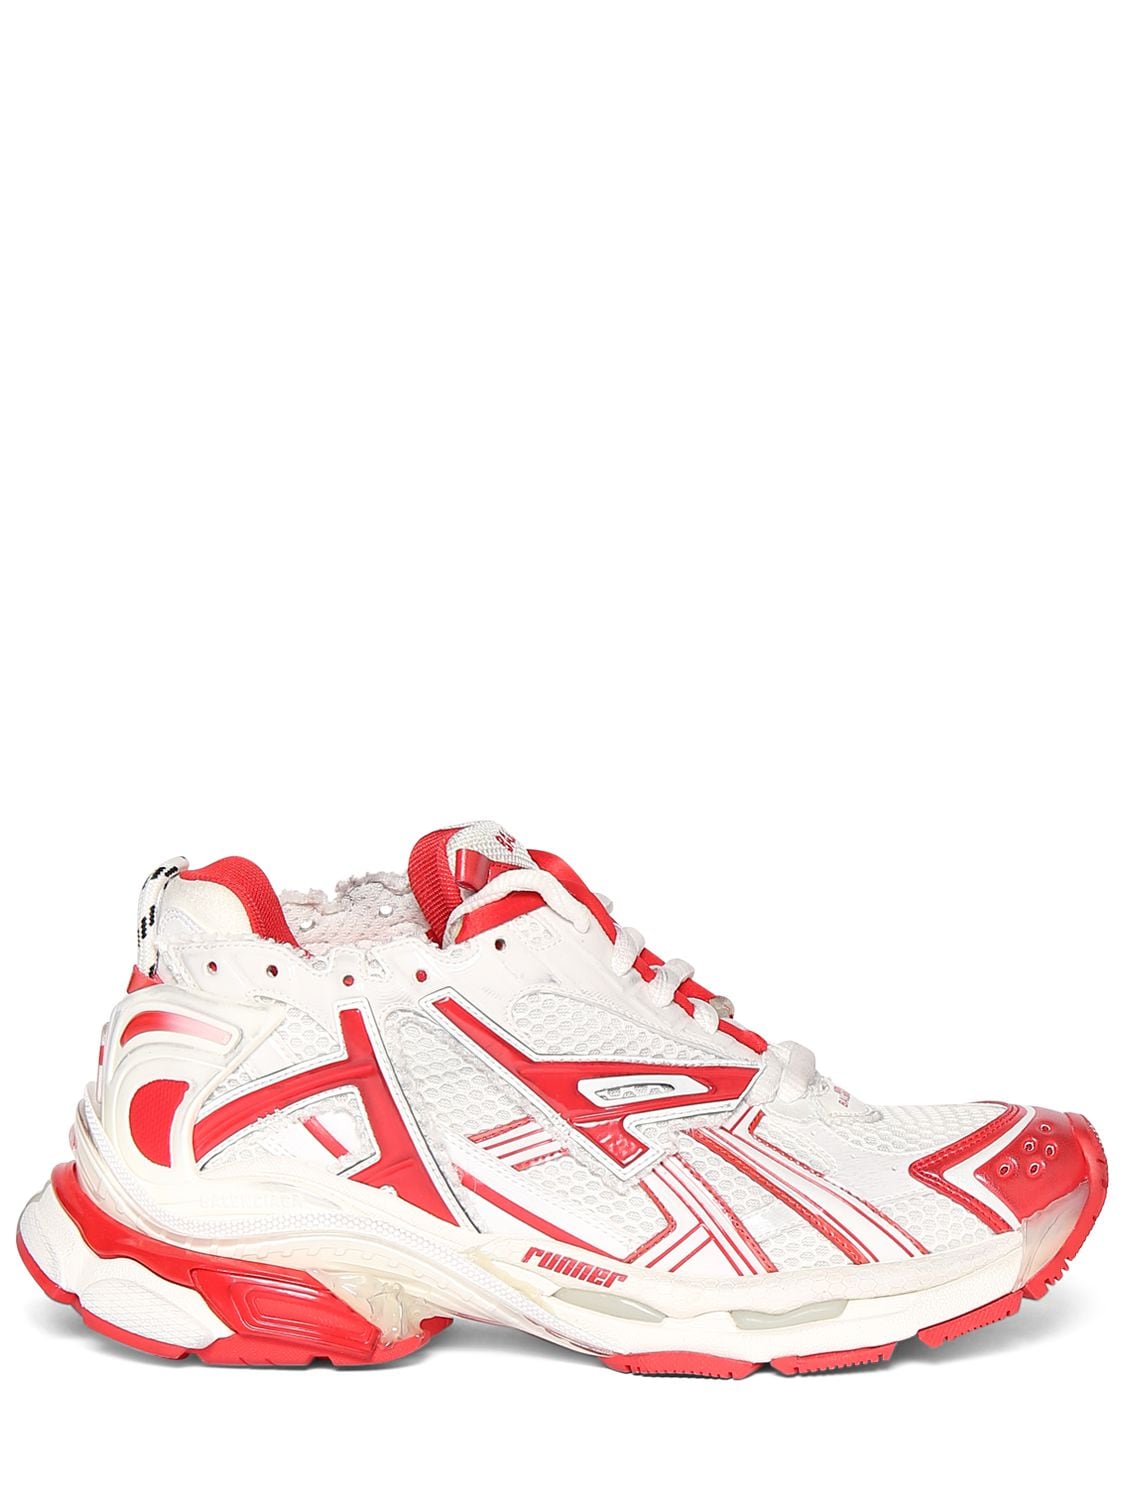 Balenciaga Runner Sneakers In White,red